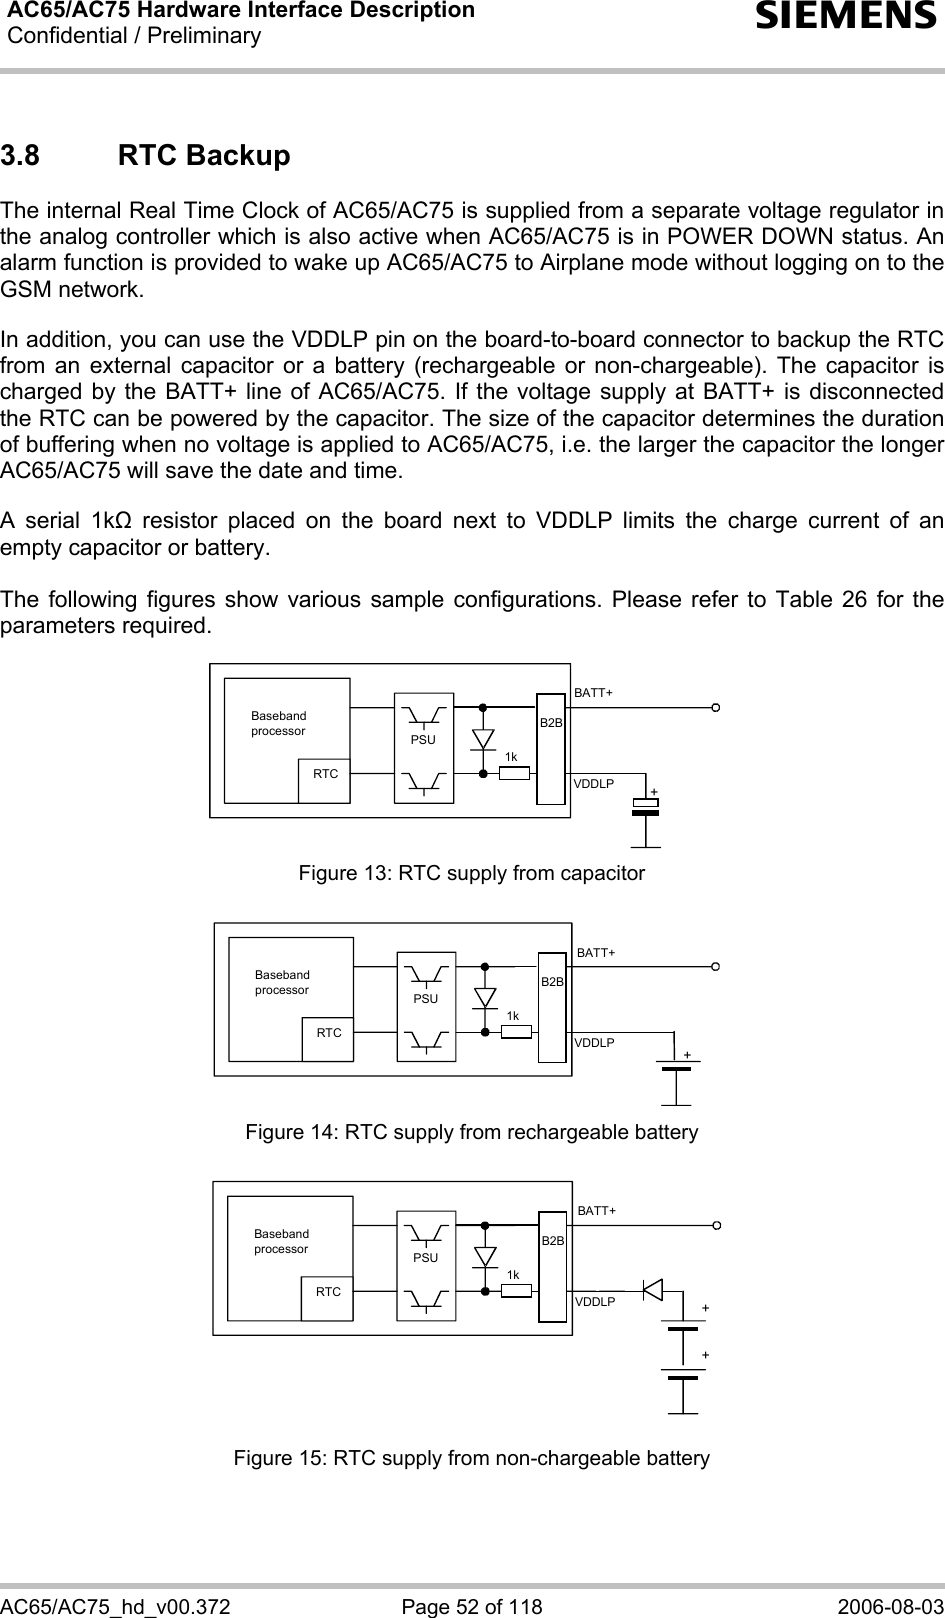 AC65/AC75 Hardware Interface Description Confidential / Preliminary   s AC65/AC75_hd_v00.372  Page 52 of 118  2006-08-03 3.8 RTC Backup The internal Real Time Clock of AC65/AC75 is supplied from a separate voltage regulator in the analog controller which is also active when AC65/AC75 is in POWER DOWN status. An alarm function is provided to wake up AC65/AC75 to Airplane mode without logging on to the GSM network.   In addition, you can use the VDDLP pin on the board-to-board connector to backup the RTC from an external capacitor or a battery (rechargeable or non-chargeable). The capacitor is charged by the BATT+ line of AC65/AC75. If the voltage supply at BATT+ is disconnected the RTC can be powered by the capacitor. The size of the capacitor determines the duration of buffering when no voltage is applied to AC65/AC75, i.e. the larger the capacitor the longer AC65/AC75 will save the date and time.   A serial 1k resistor placed on the board next to VDDLP limits the charge current of an empty capacitor or battery.   The following figures show various sample configurations. Please refer to Table 26 for the parameters required.    Baseband processor RTC PSU+BATT+ 1kB2BVDDLP Figure 13: RTC supply from capacitor   RTC +BATT+ 1kB2BVDDLPBaseband processor PSU Figure 14: RTC supply from rechargeable battery   RTC ++BATT+ 1kVDDLPB2BBaseband processor PSU Figure 15: RTC supply from non-chargeable battery 